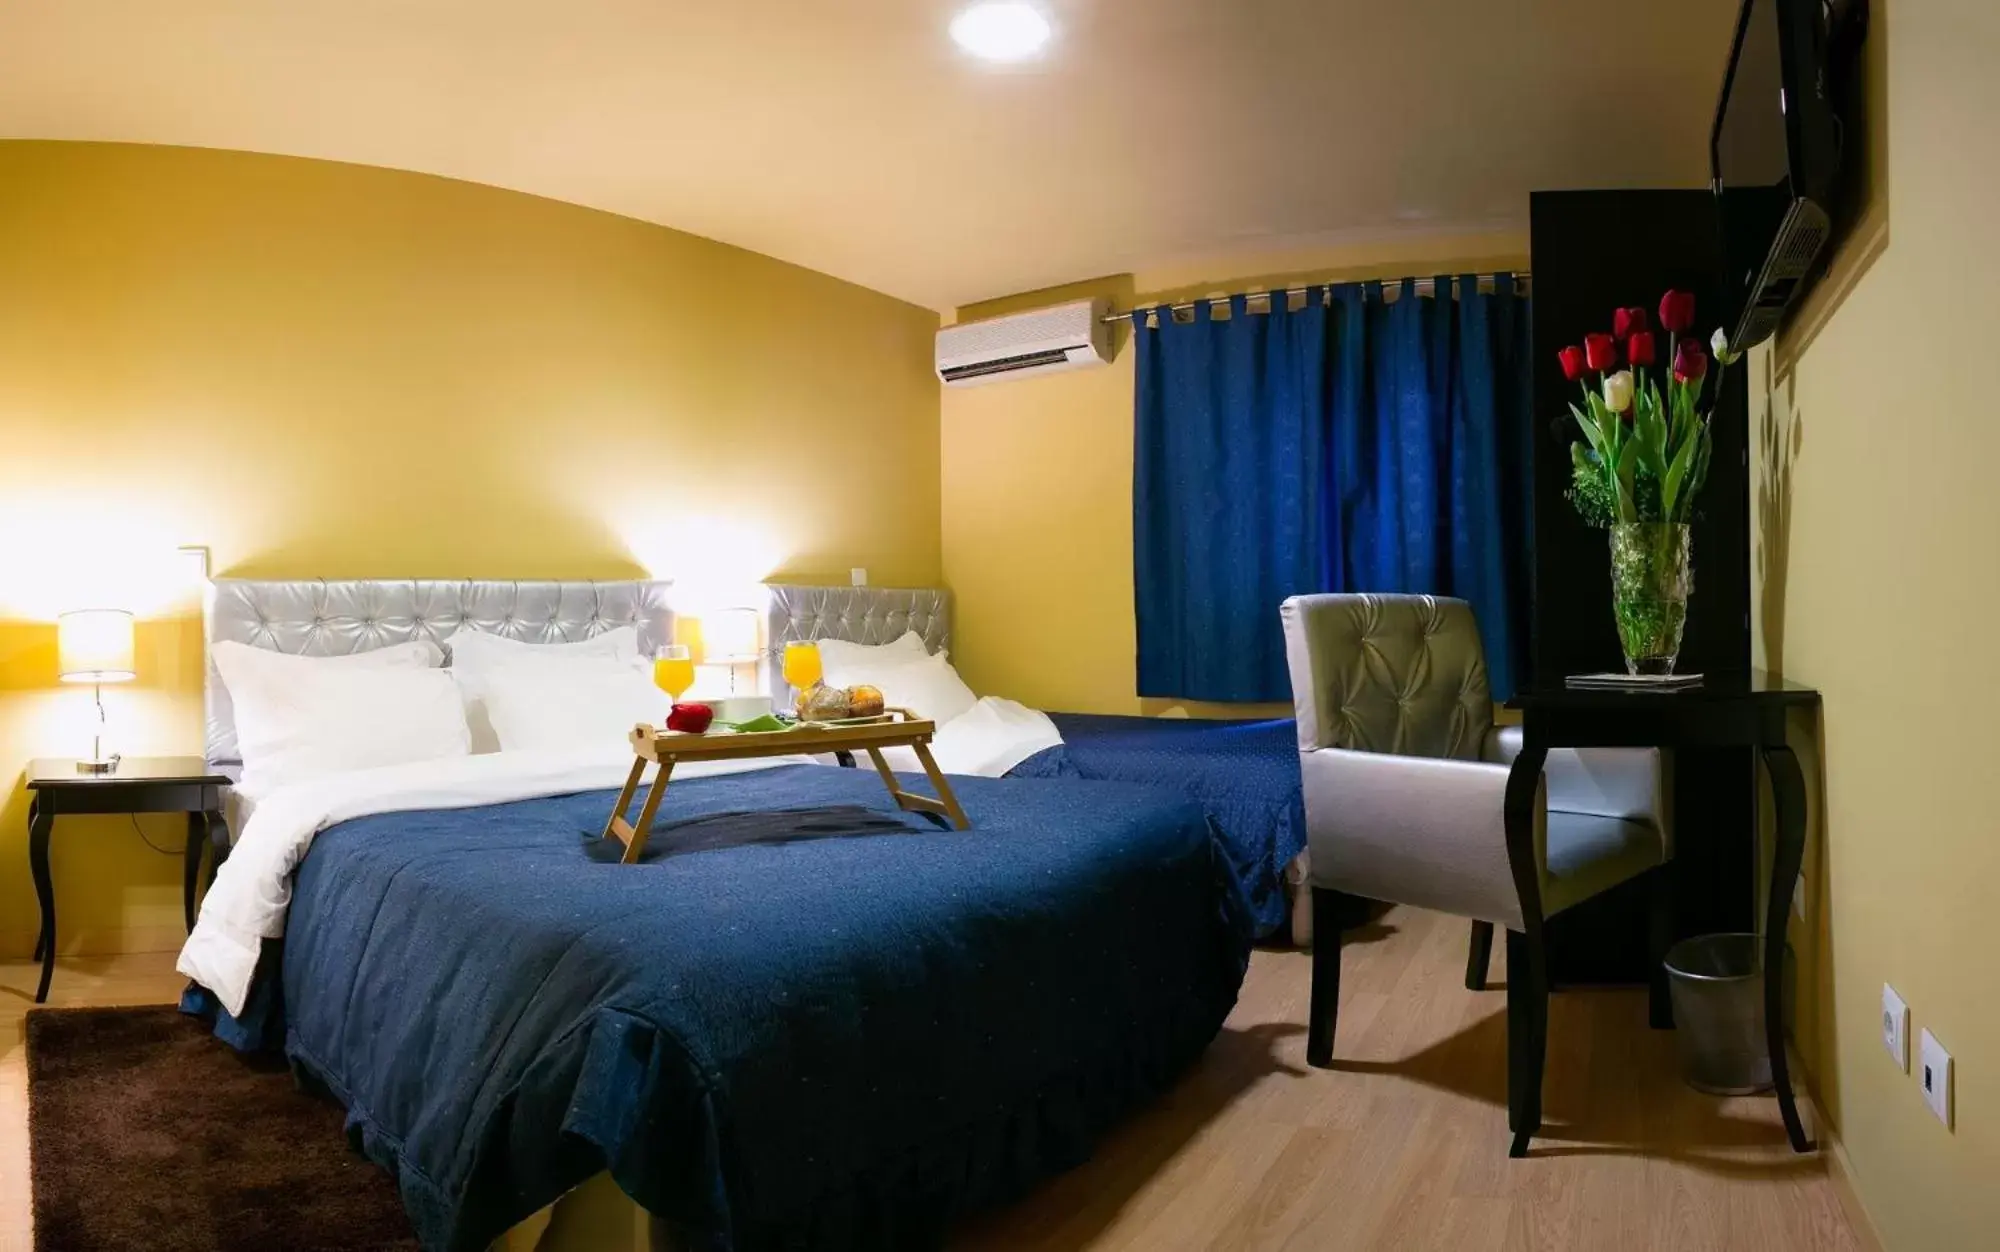 Triple Room (1 Double Bed + 1 Single Bed) in Hotel Tulipa